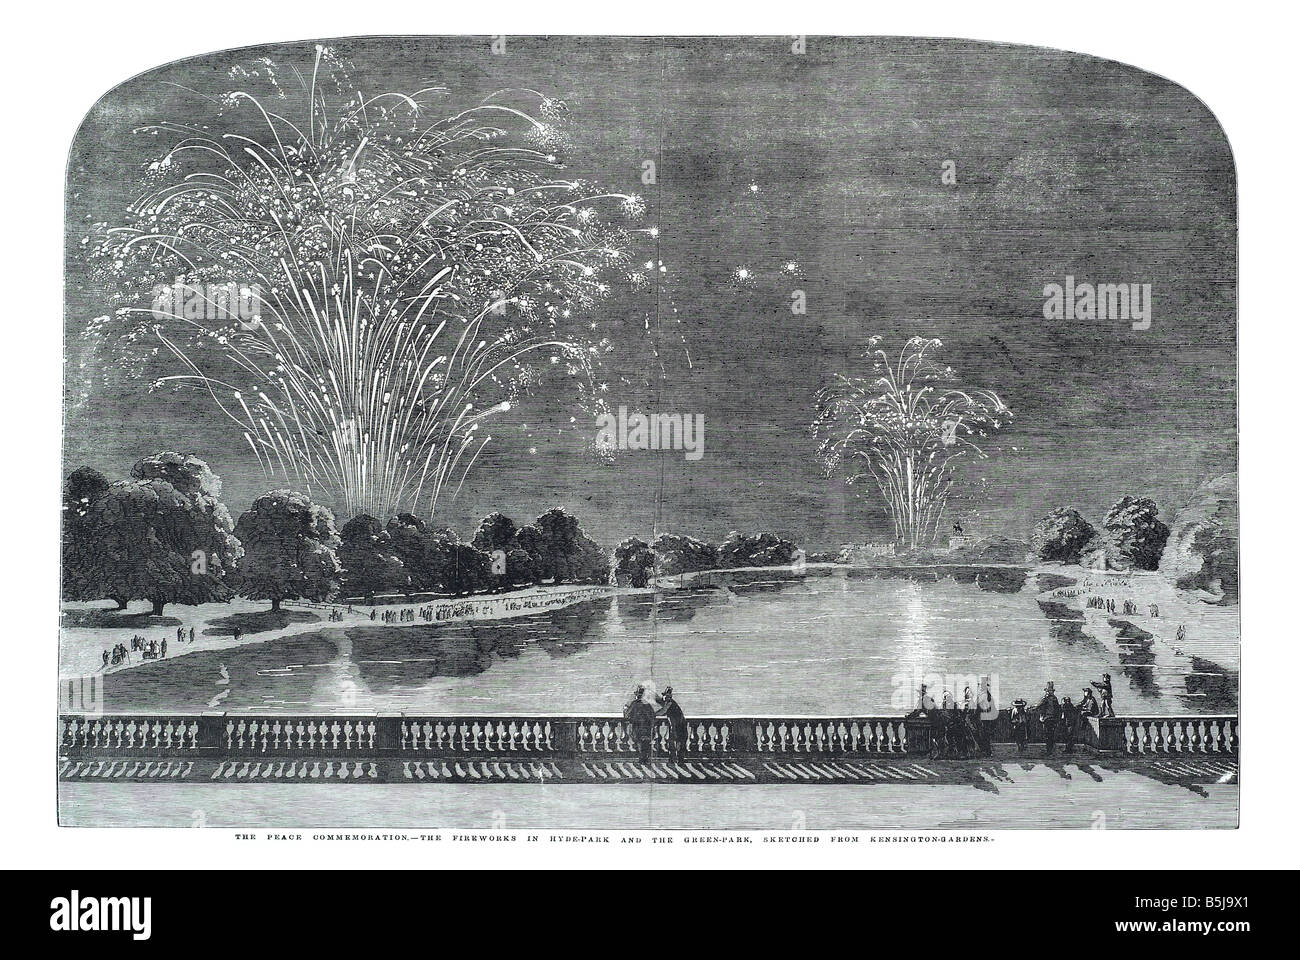 The peace commemoration the fireworks hyde park  the green park from Kensington gardens June 14 1856 The Illustrated London news Stock Photo